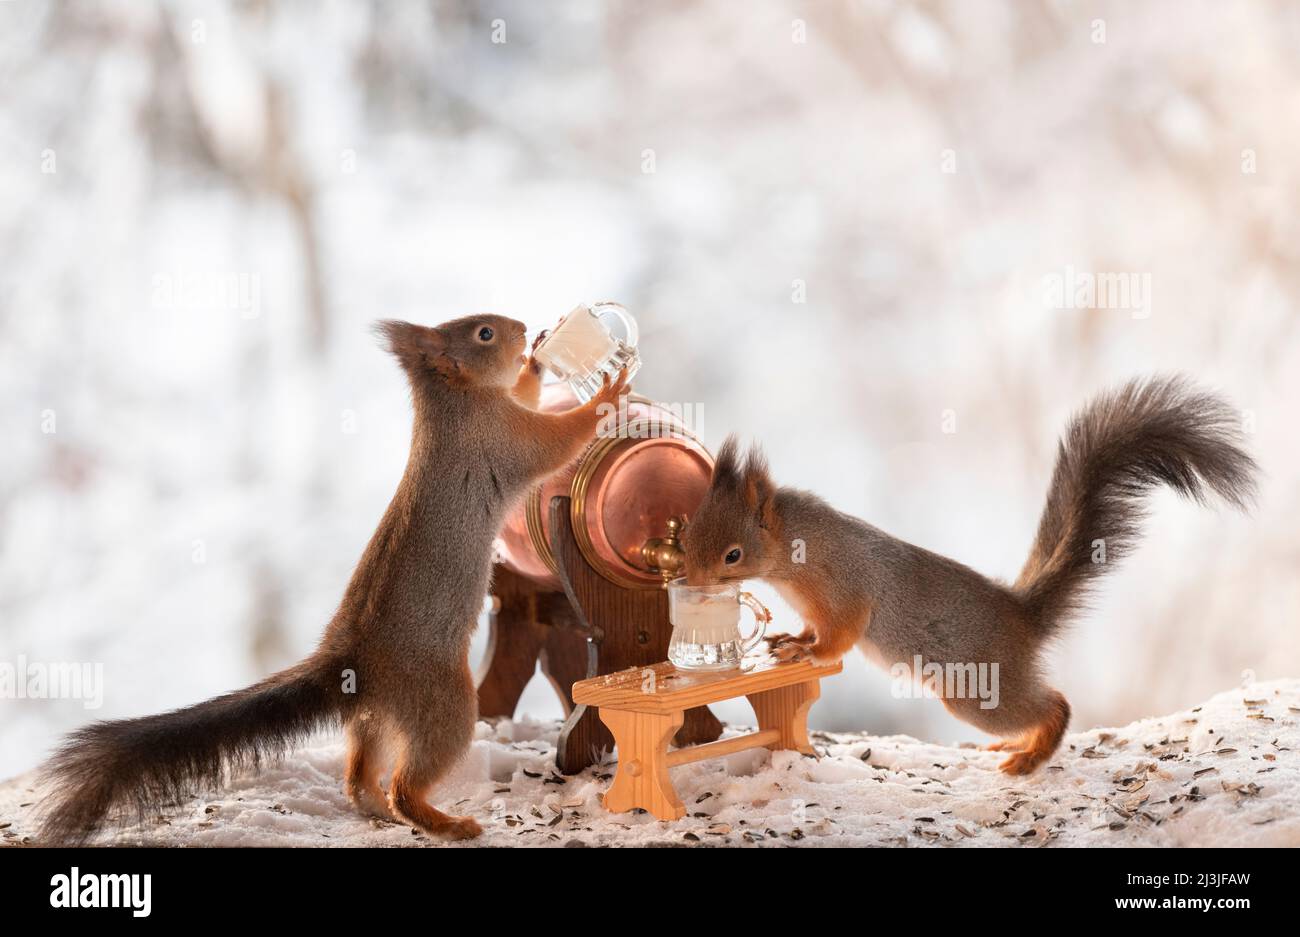 Red Squirrel holding a mug with a beer barrel in snow Stock Photo